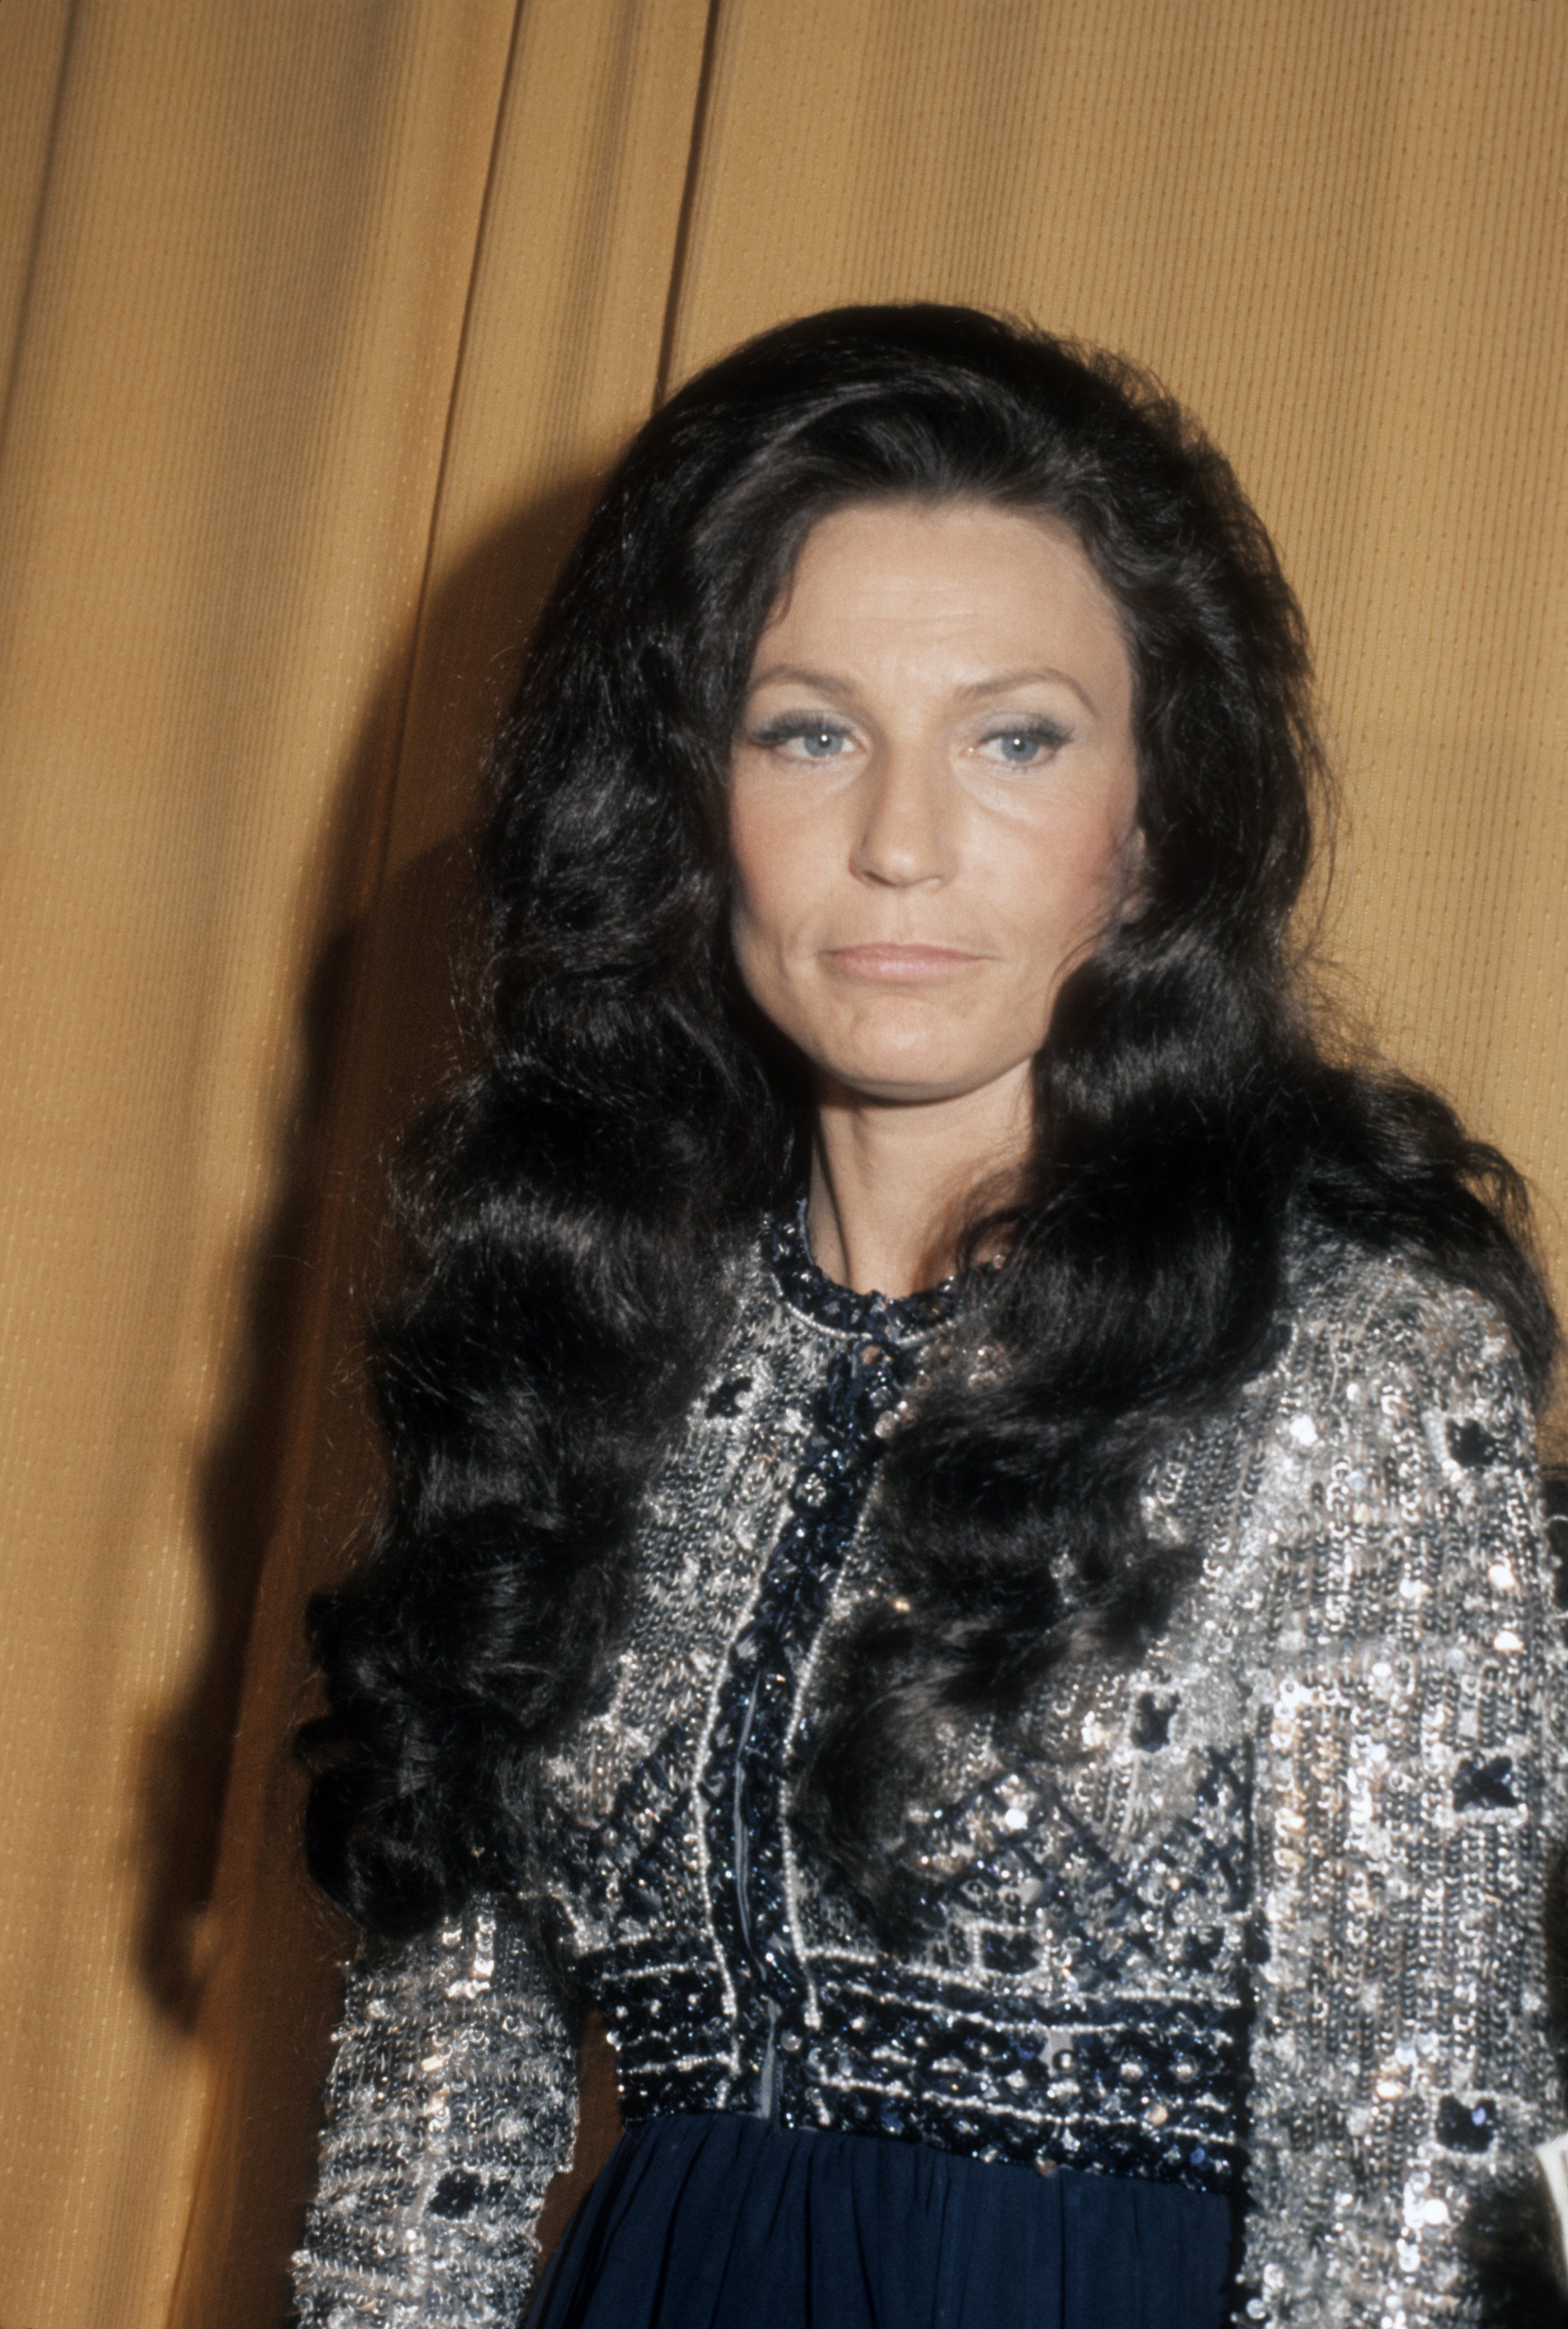 Country singer Loretta Lynn attends the 6th Annual CMA Awards at the Ryman Auditorium in 1972 in Nashville, Tennessee. | Source: Getty Images